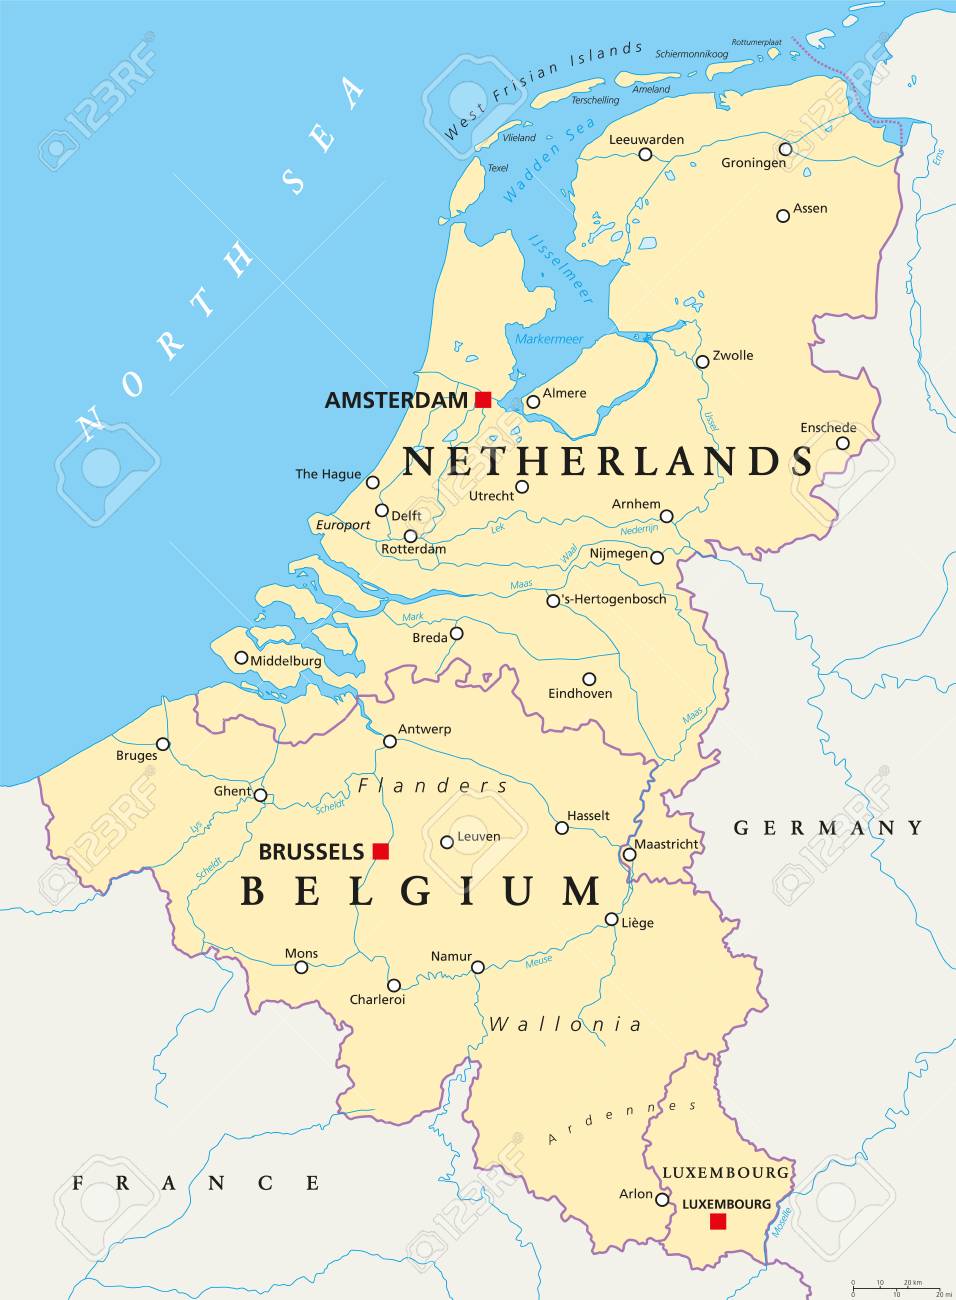 Benelux Union, Belgium, Netherlands and Luxembourg, map